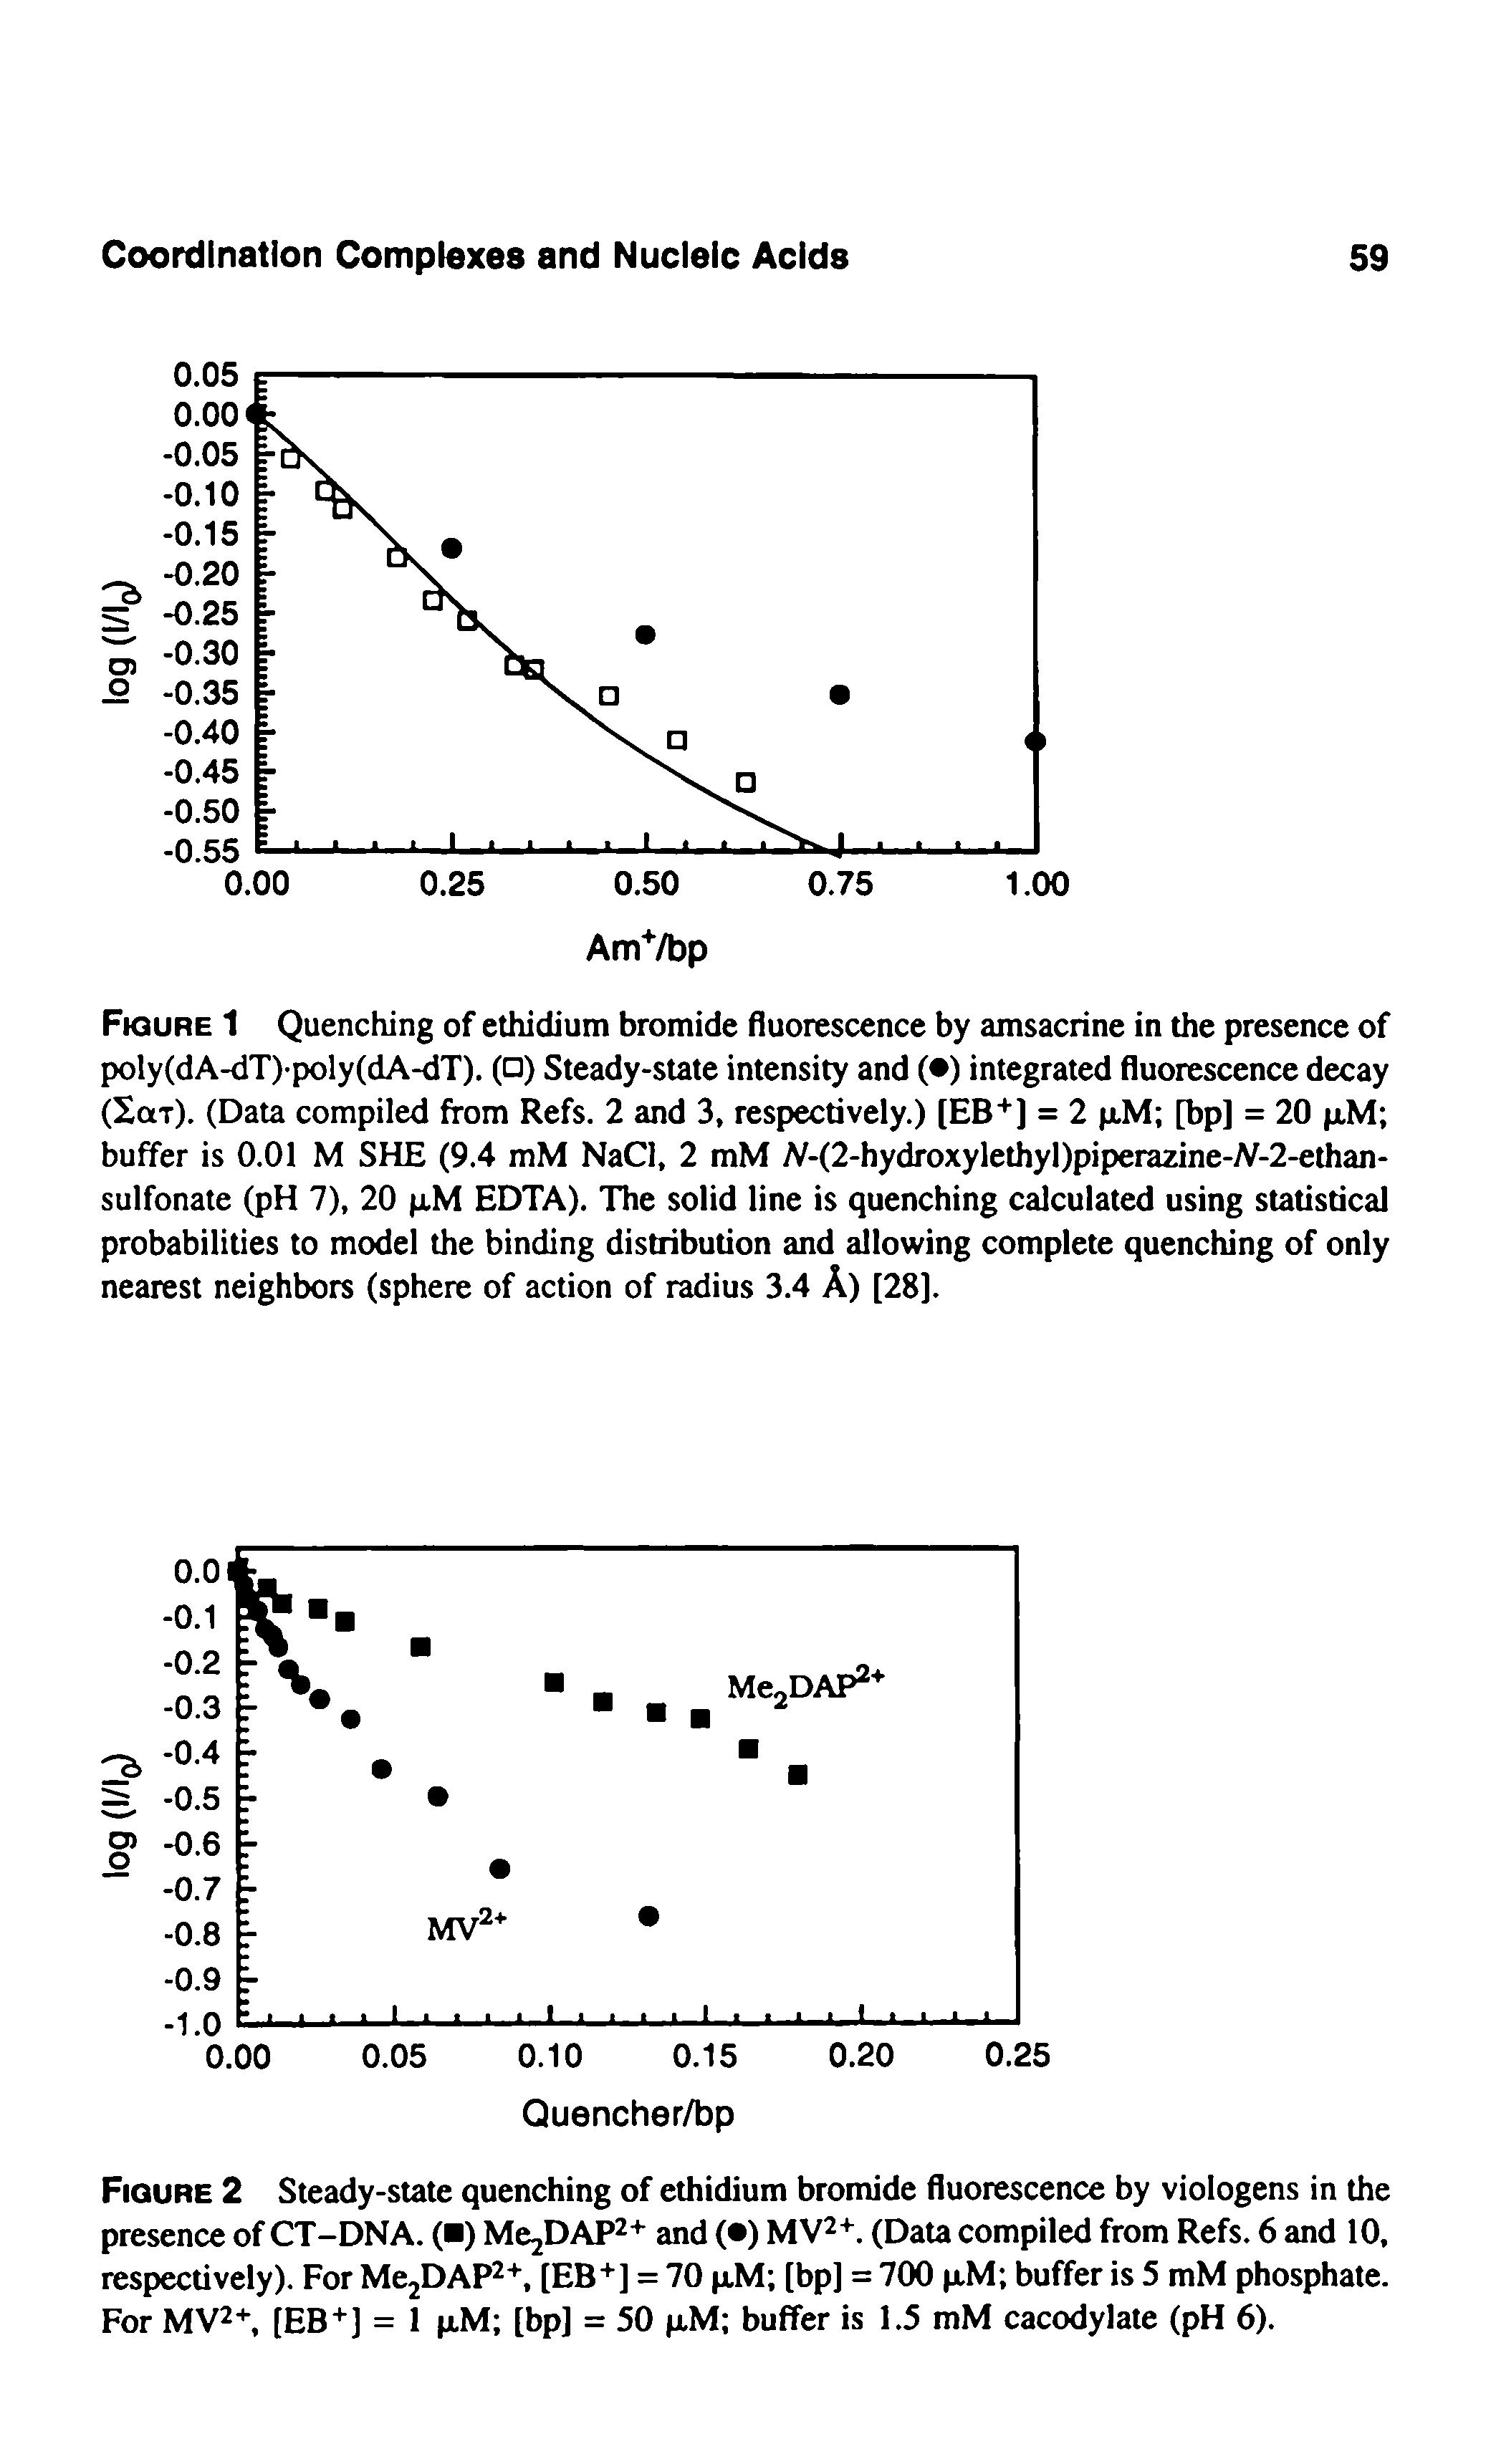 Figure 1 Quenching of ethidium bromide fluorescence by amsacrine in the presence of poly(dA-dT)-poly(dA-dT). ( ) Steady-state intensity and ( ) integrated fluorescence decay (Scxt). (Data compiled from Refs. 2 and 3, respectively.) [EB+] = 2 pM [bp] = 20 pM buffer is 0.01 M SHE (9.4 mM NaCl, 2 mM N-(2-hydroxylethyl)piperazine-N-2-ethan-sulfonate (pH 7), 20 pM EDTA). The solid line is quenching calculated using statistical probabilities to model the binding distribution and allowing complete quenching of only nearest neighbors (sphere of action of radius 3.4 A) [28].